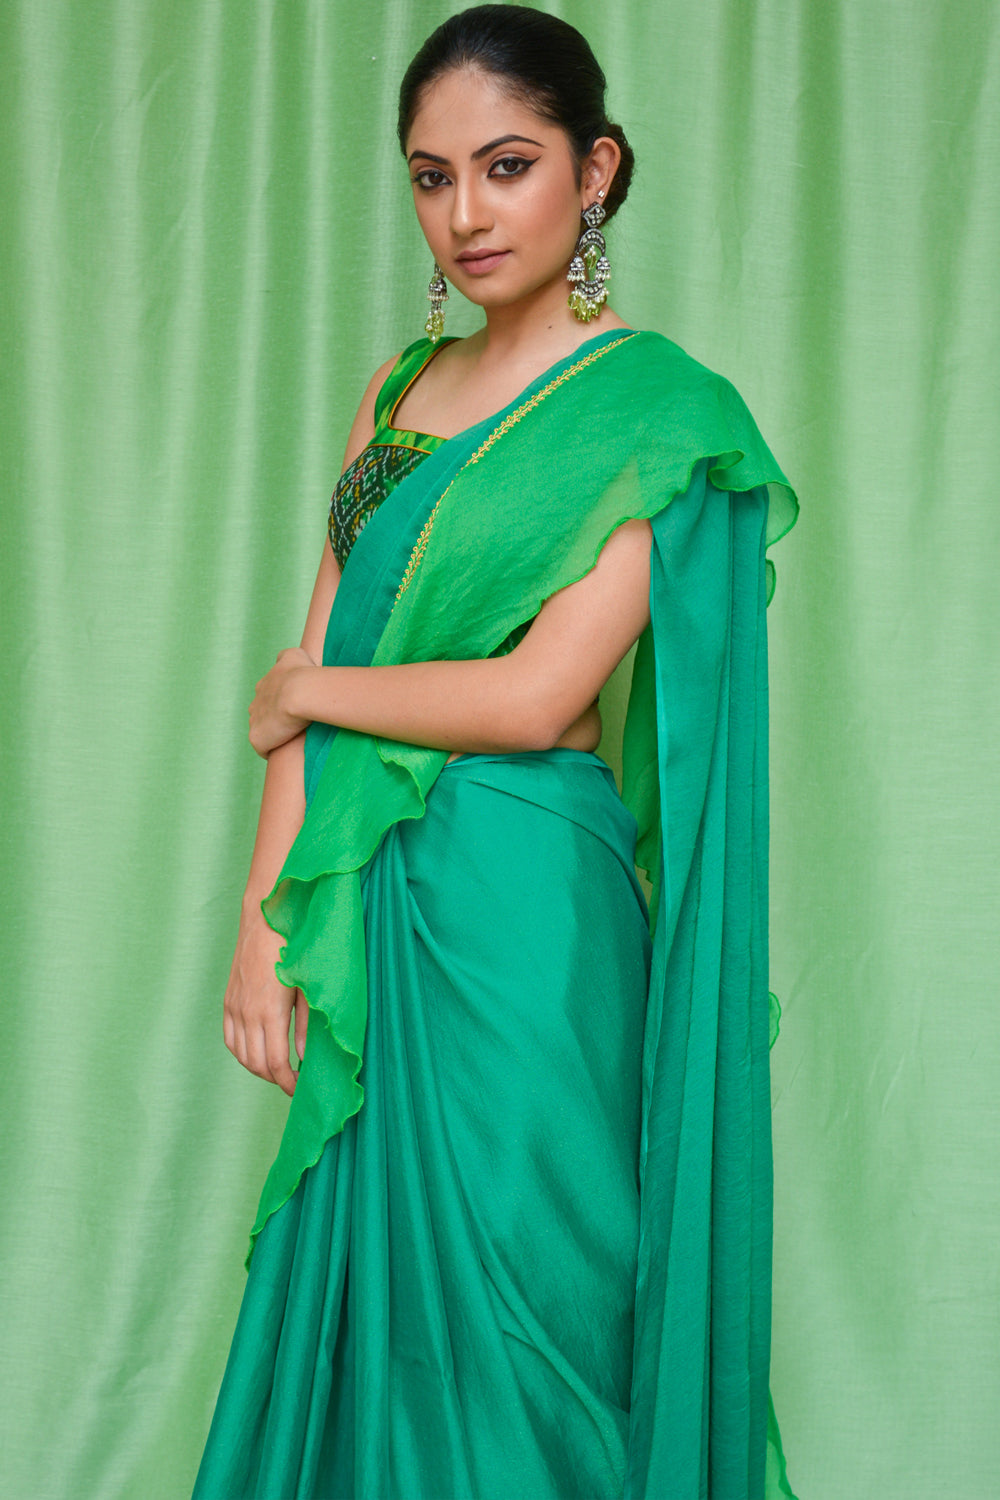 Green shimmer georgette ruffle saree with green-gold border - House of Blouse